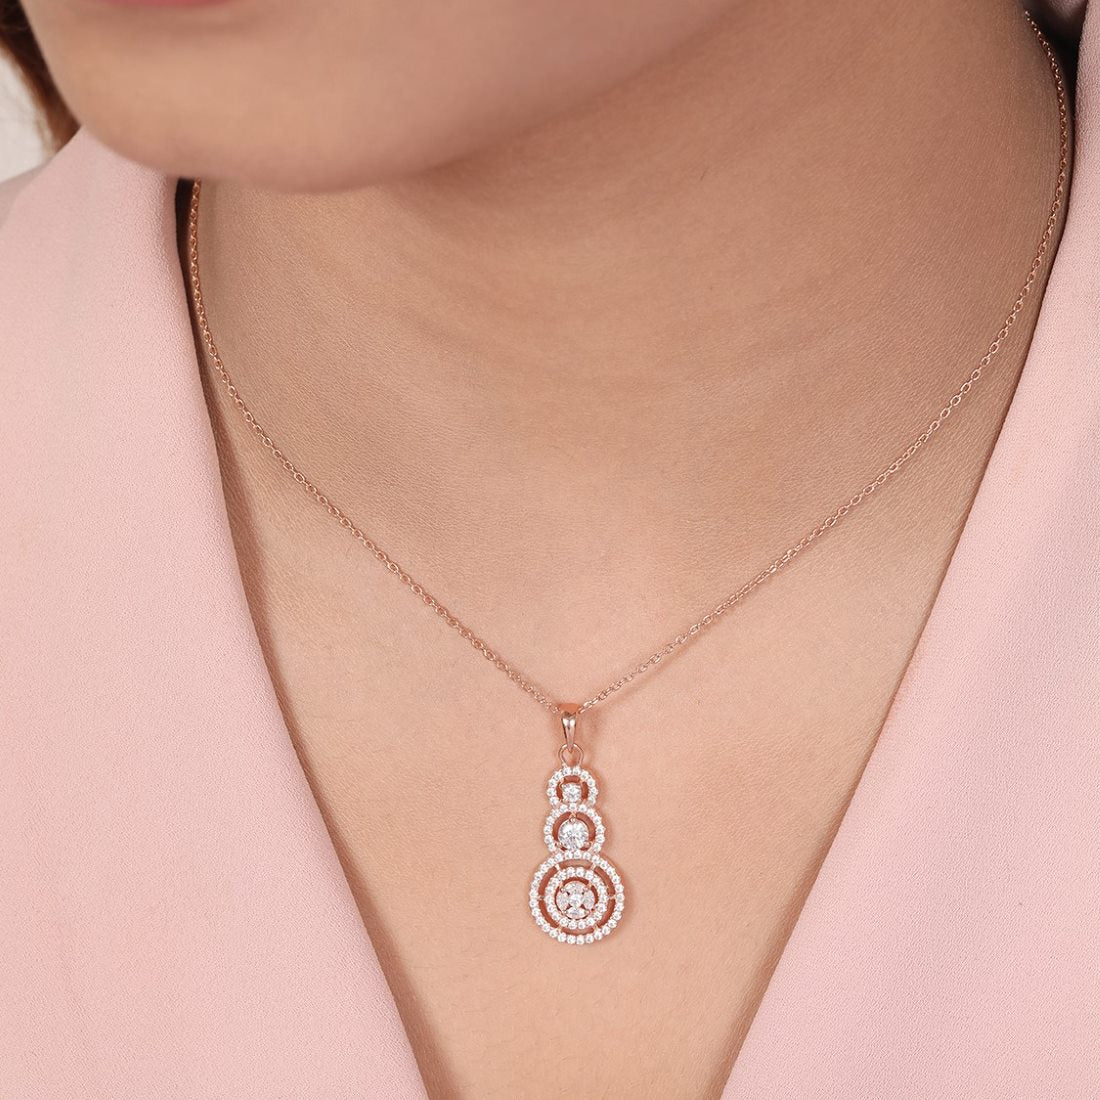 Breathtaking Circles Rose Gold Plated 925 Sterling Silver Pendant with Chain